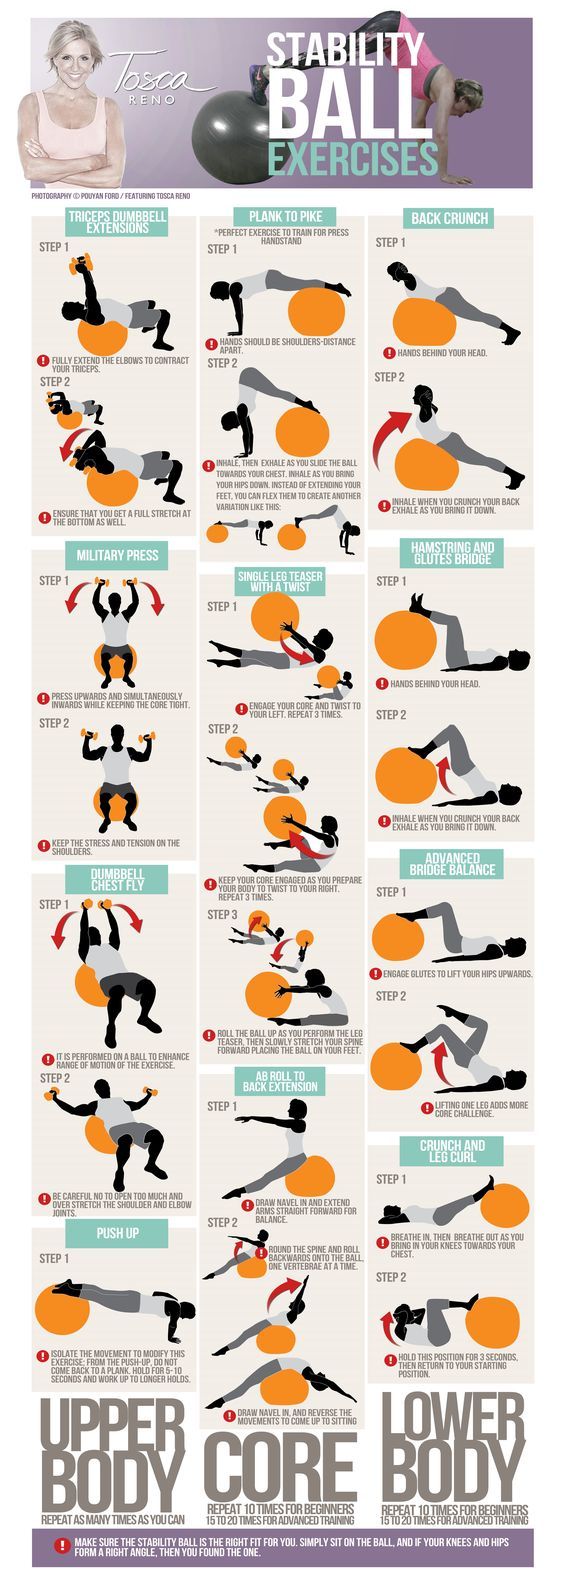 exercises with stability ball - Clip Art Library